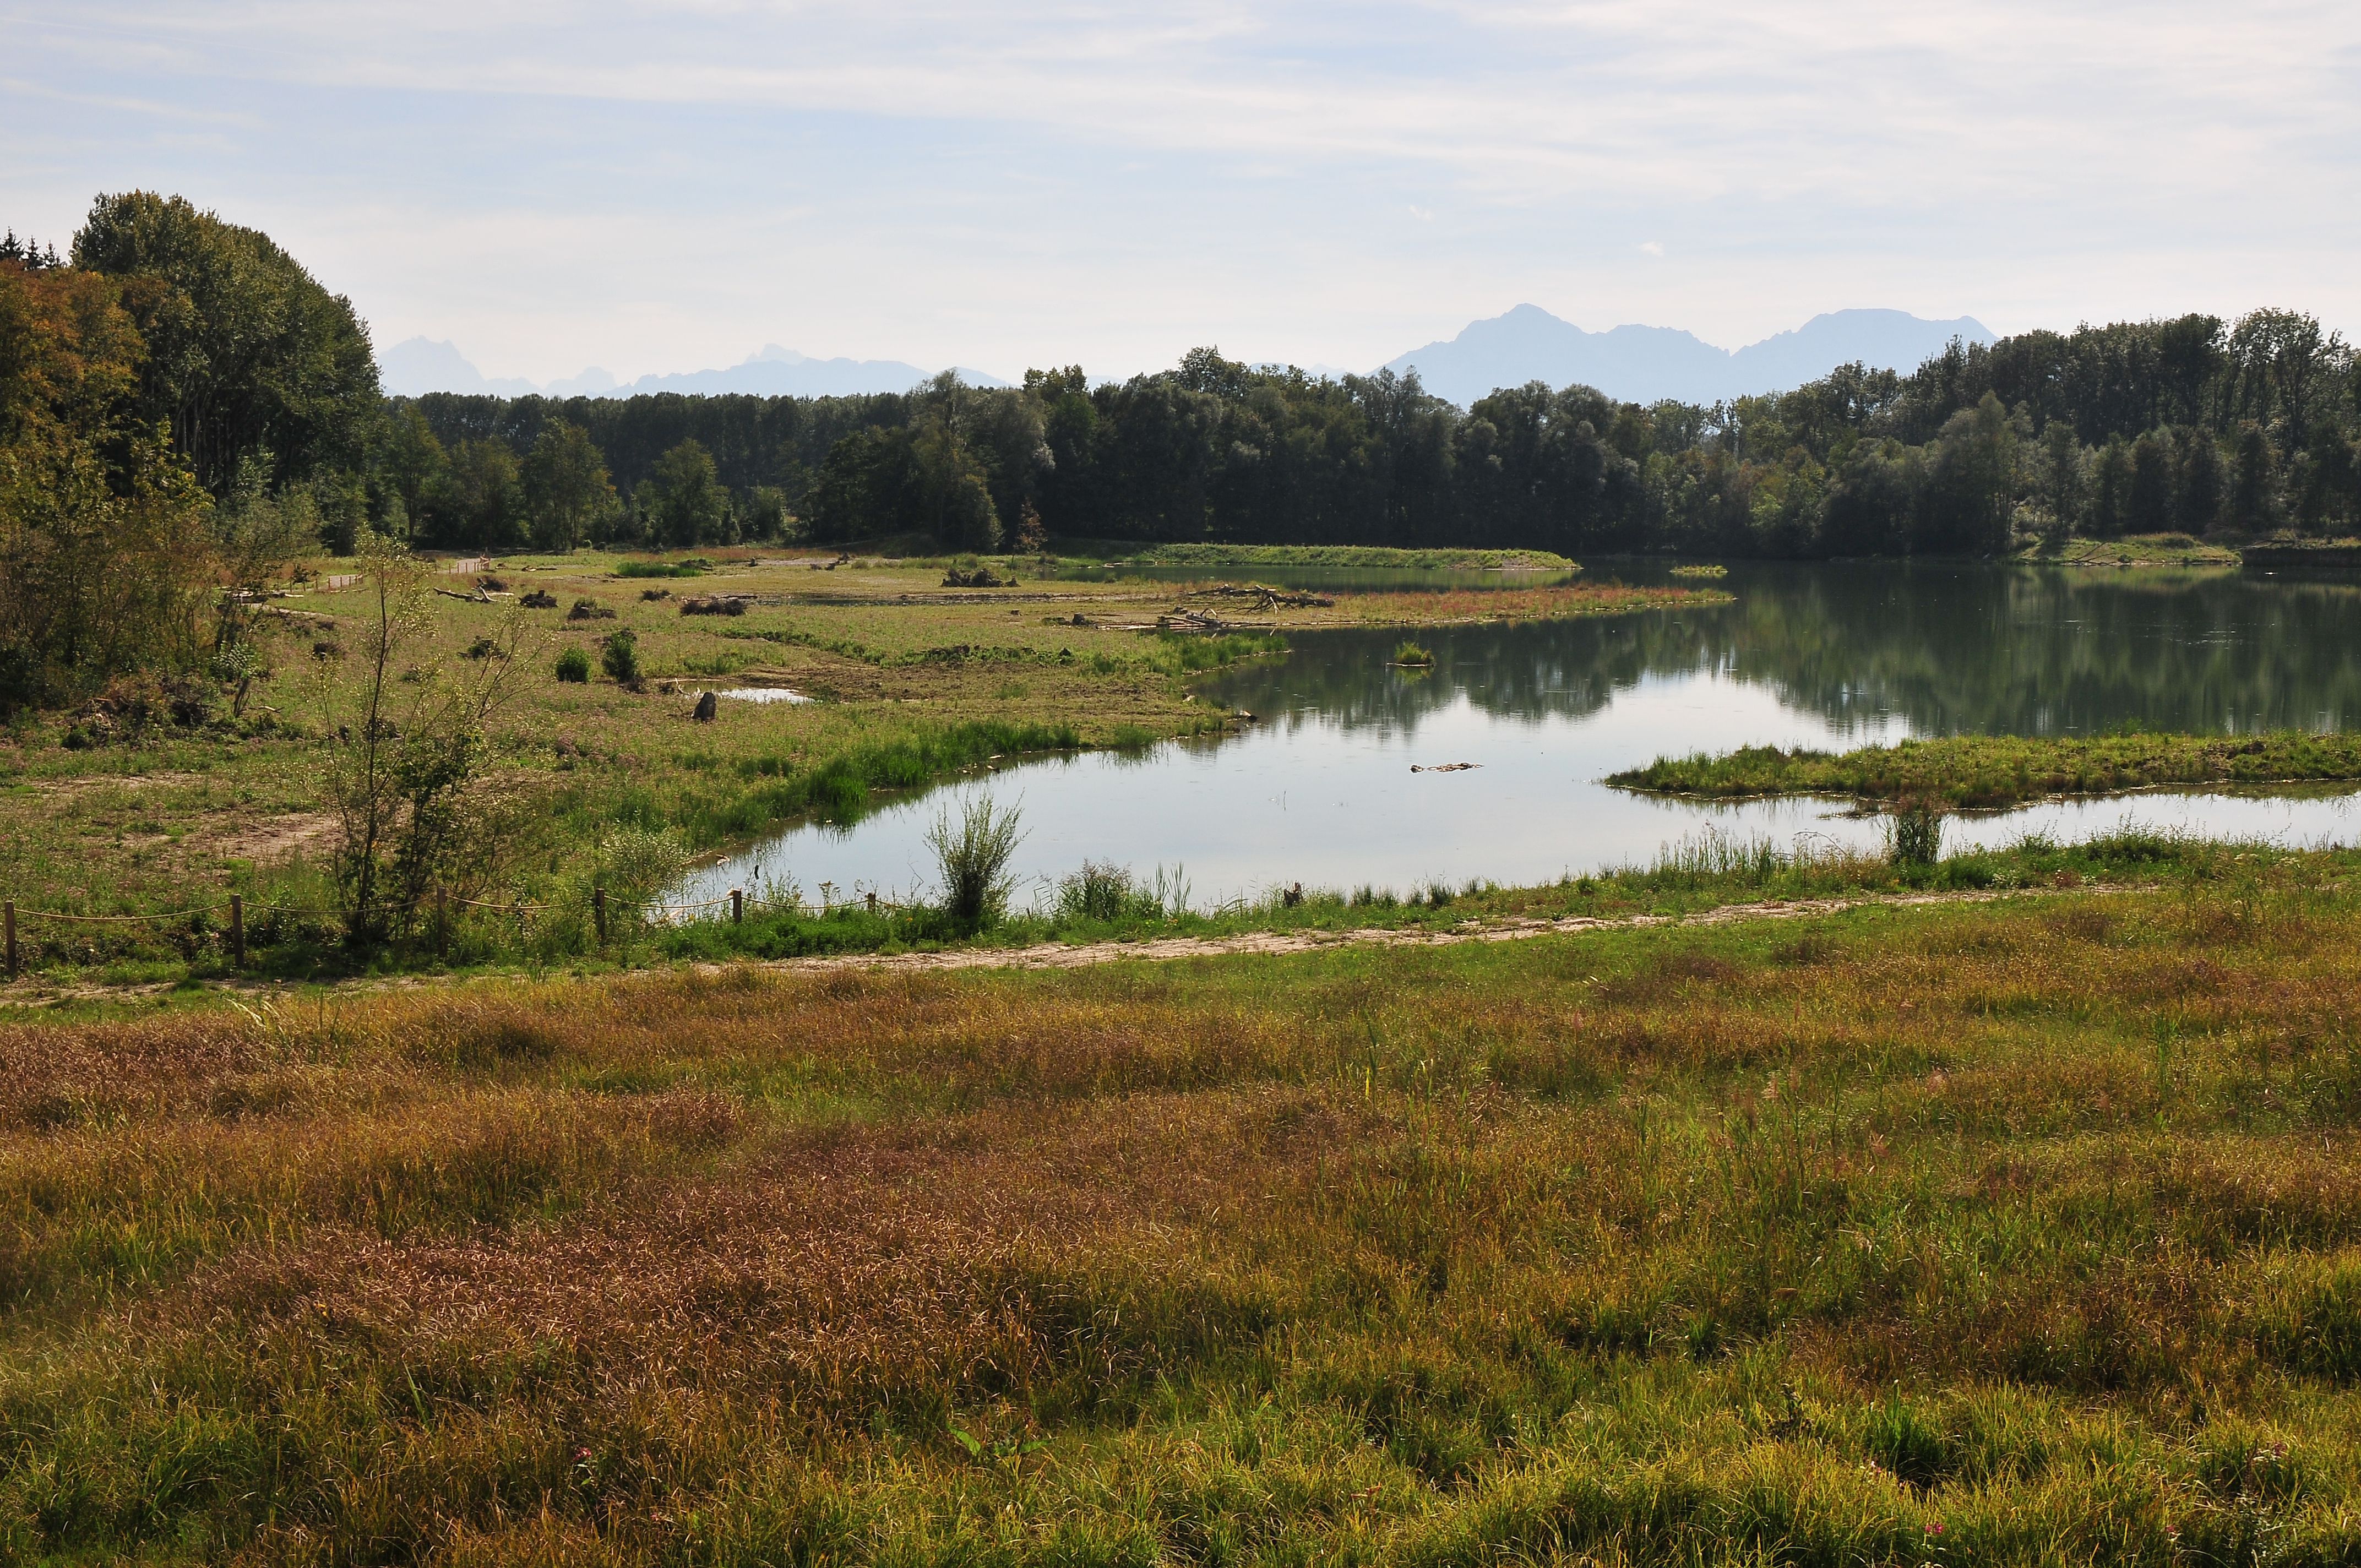 The lake in the rehabilitated floodplain functions as a wetland habitat; it favours natural species and improves the water balance of the floodplain.